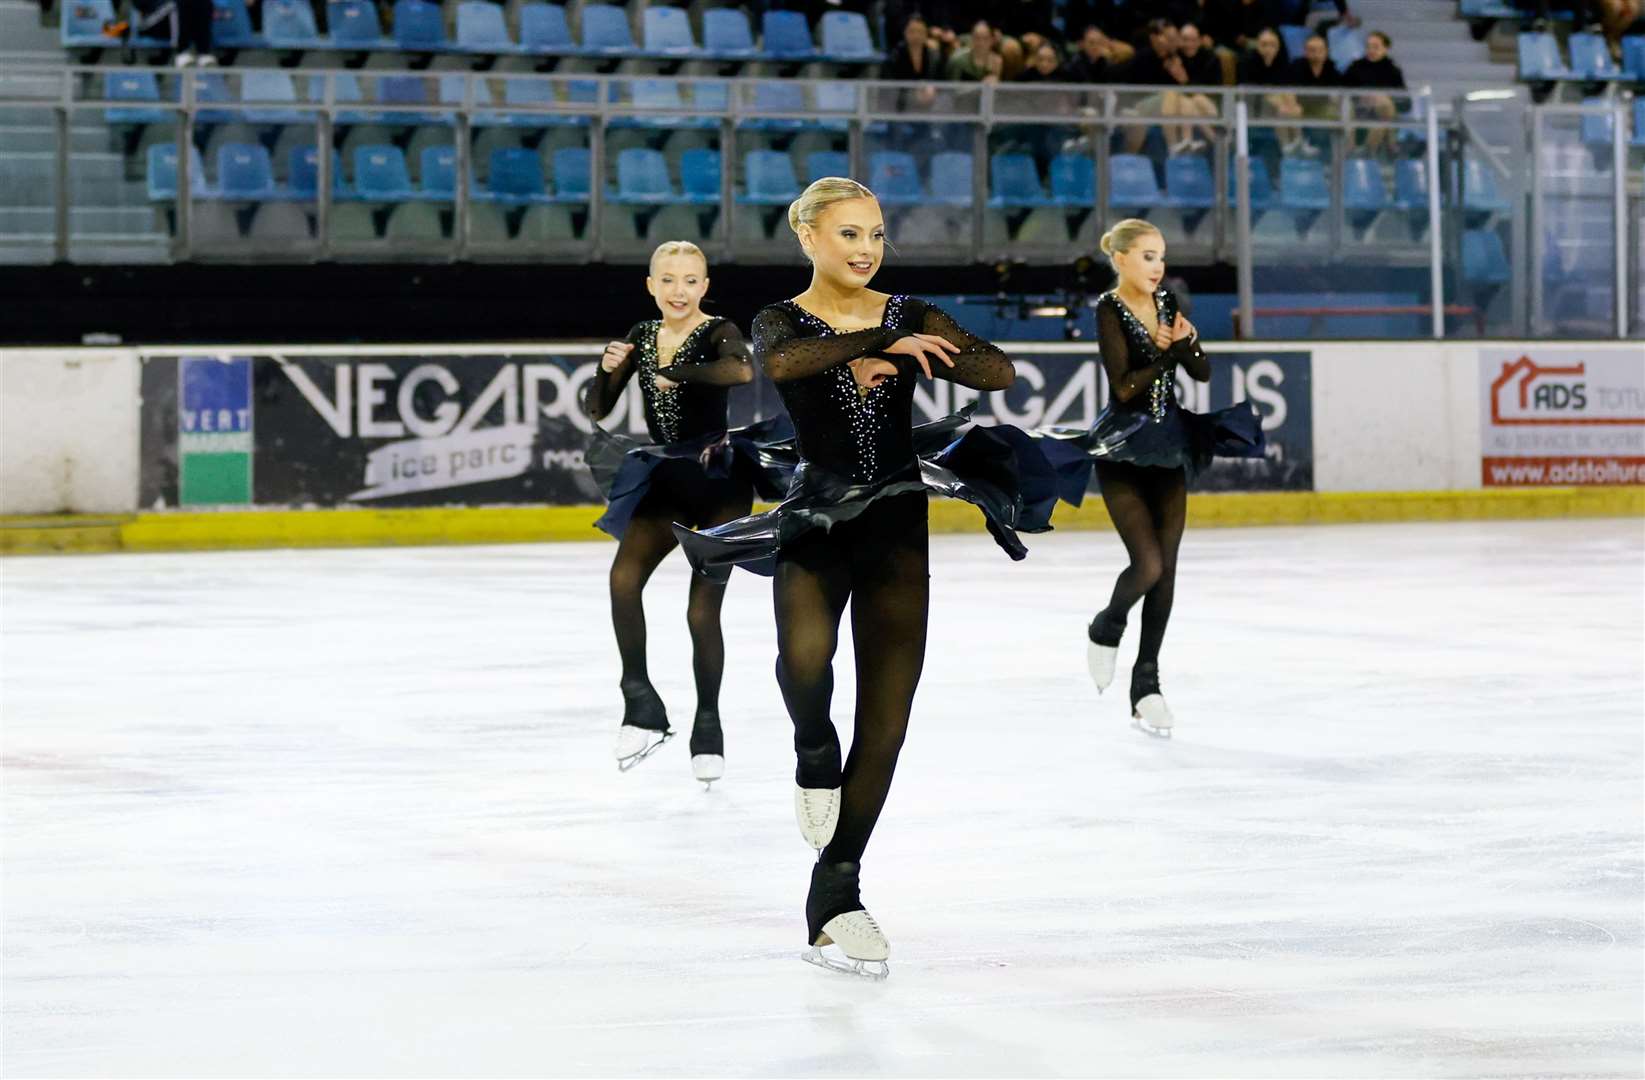 Northern Lights of Great Britain competing in the International Mixed Age Trophy at Vegapolis Ice Parc on April 20, 2024 in Montpellier, France. Picture: Philipp Dolder.